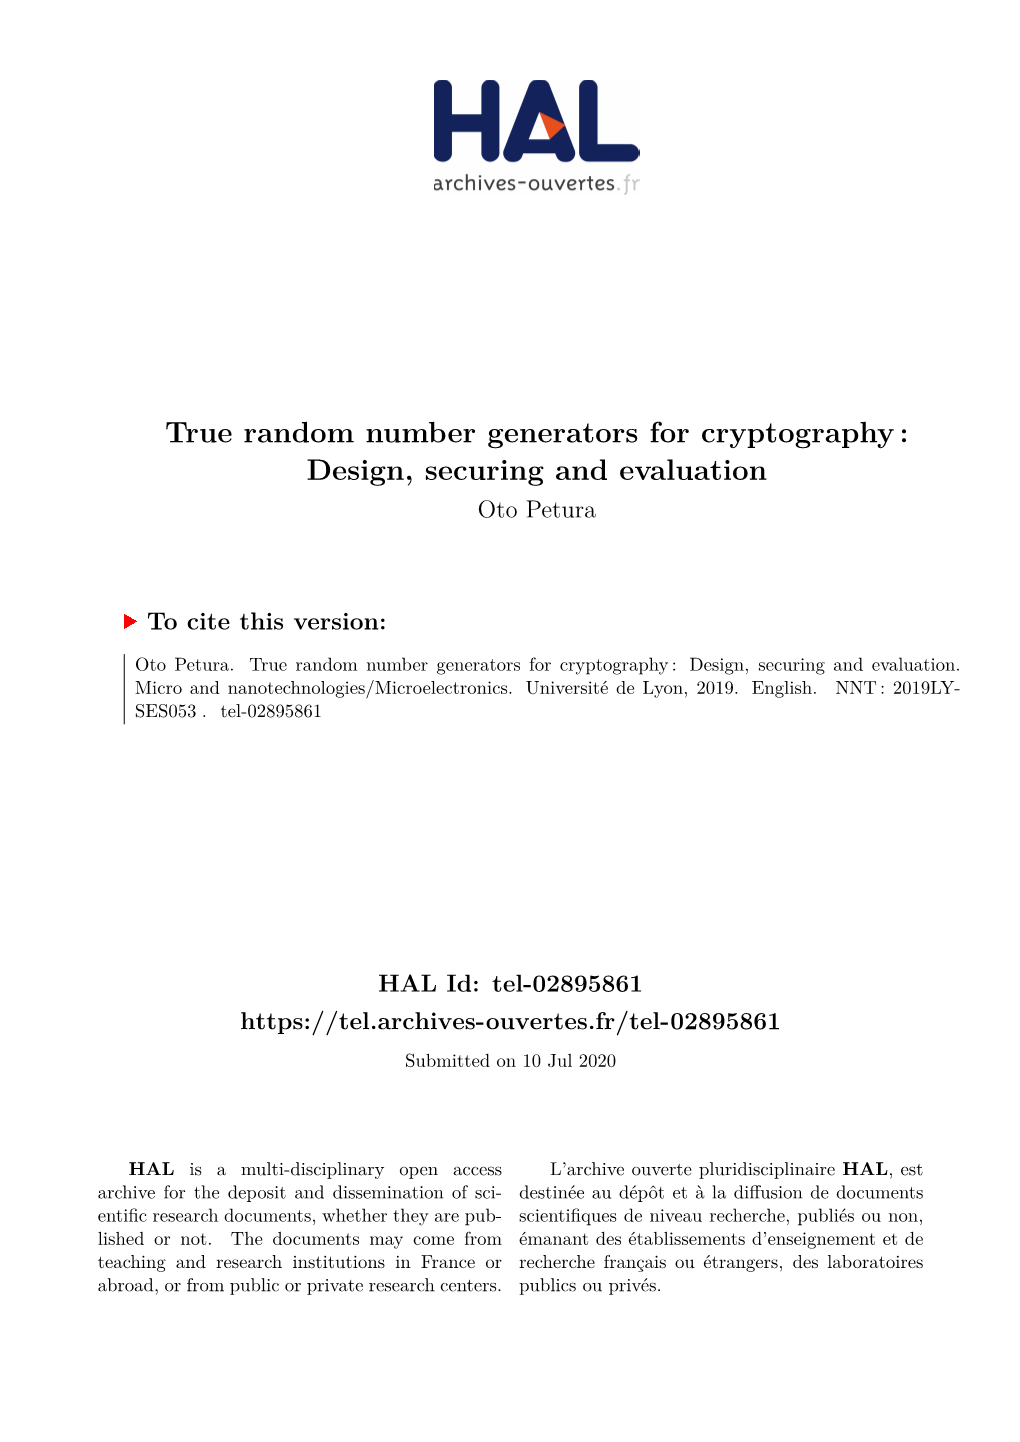 True Random Number Generators for Cryptography: Design, Securing and Evaluation